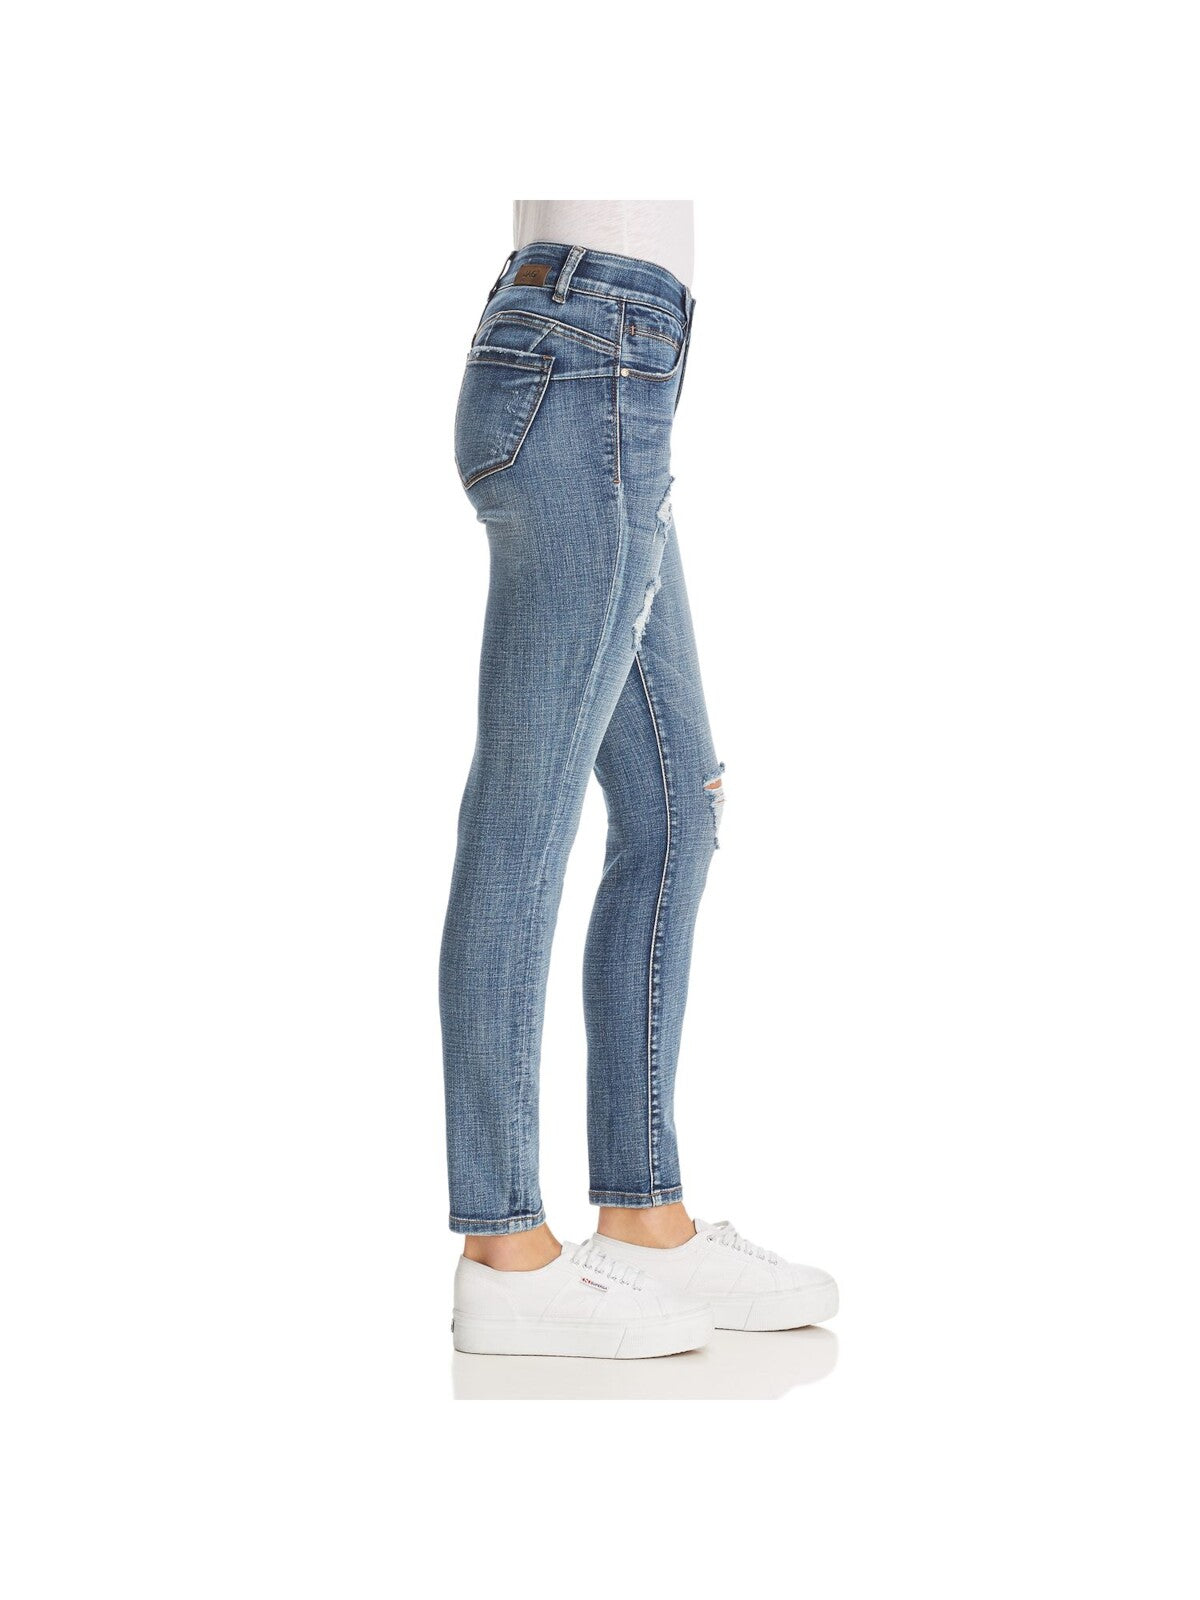 JAG Womens Pocketed Distressed Skinny Jeans